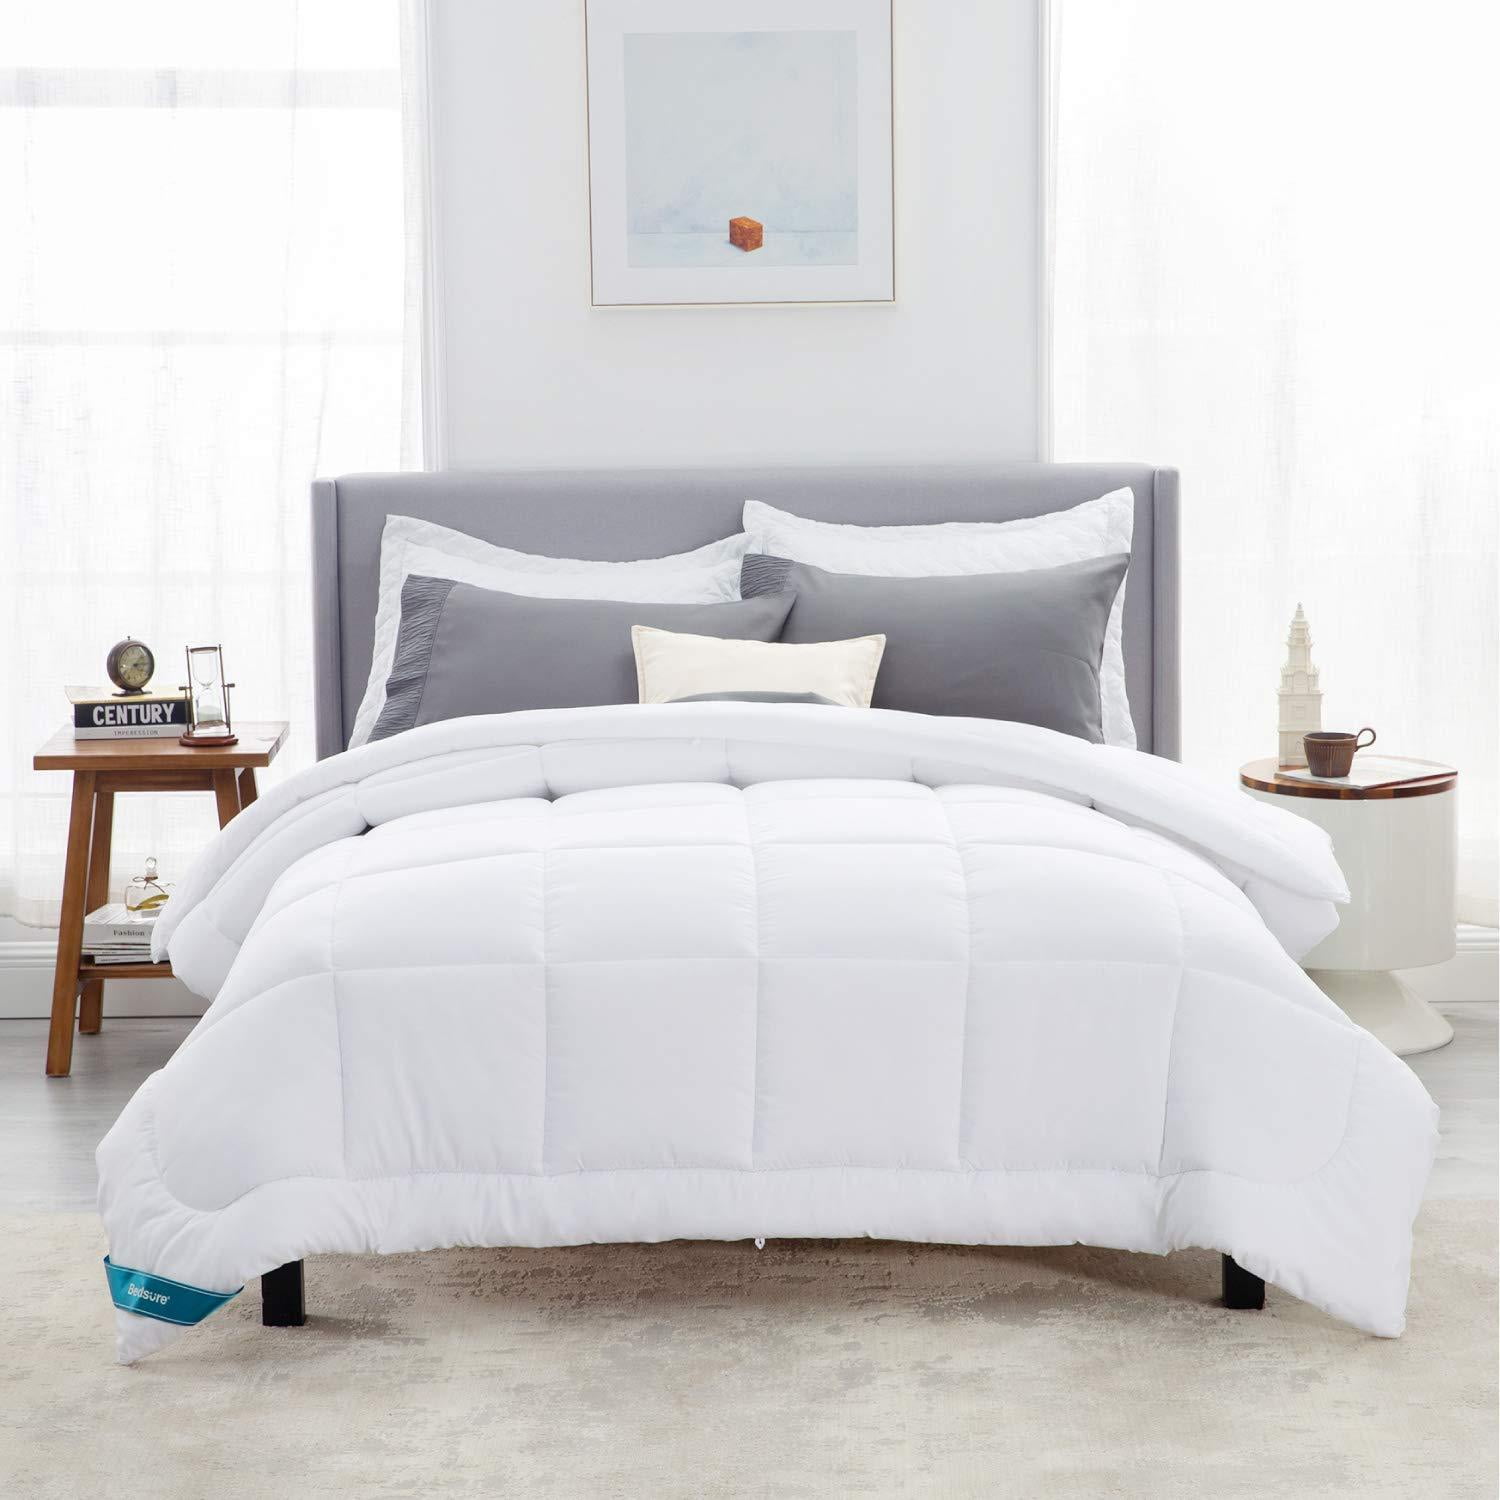 300GSM Quilted Bedding Comforte Details about   Bedsure King Size Comforter Duvet Insert White 